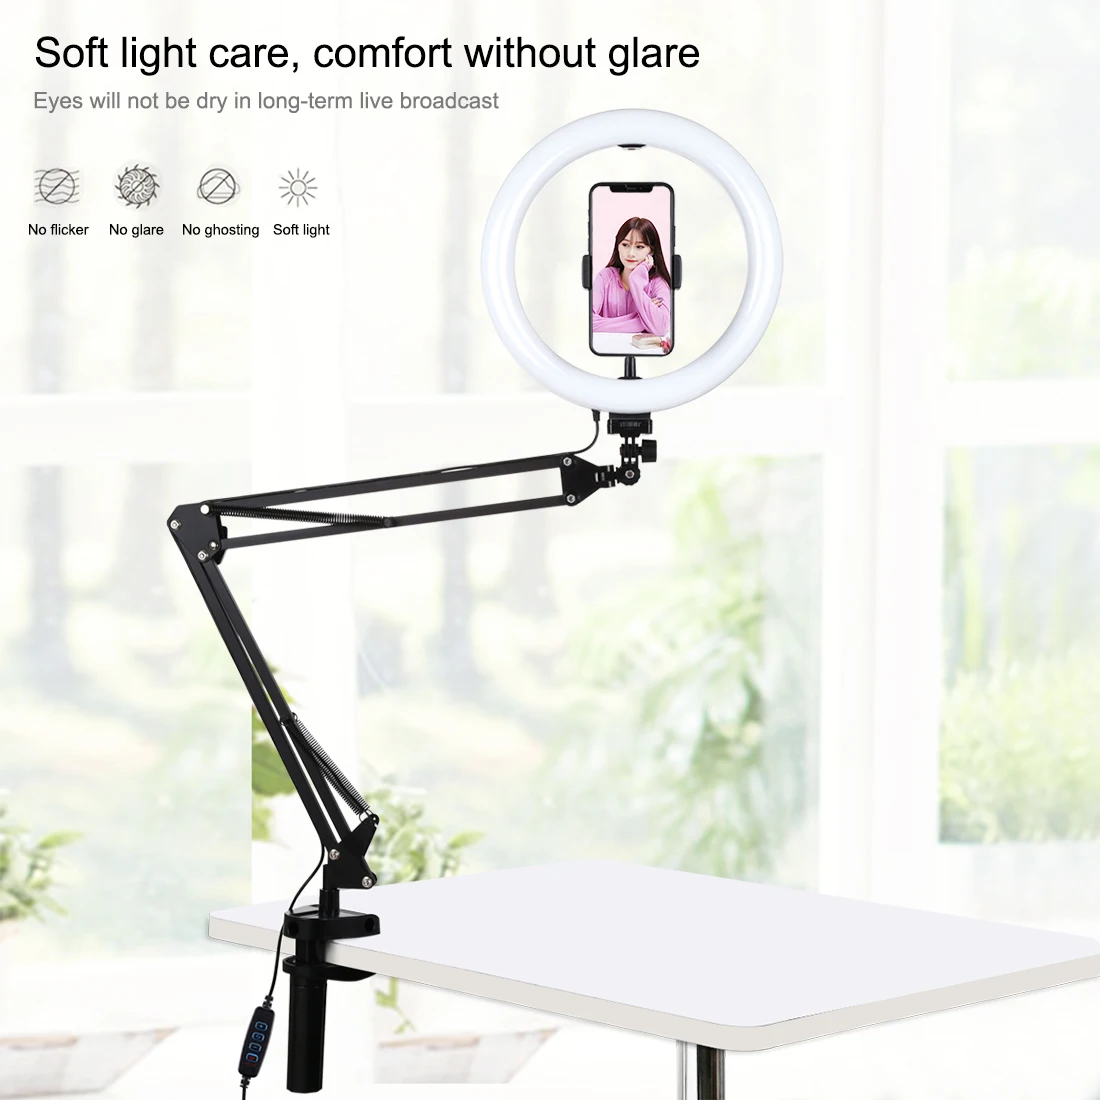 26CM Ring Light USB With Phone Stand + Adjustable Desktop Boom Magic Arm For YouTube Live Video Streaming , Makeup ,Selfie